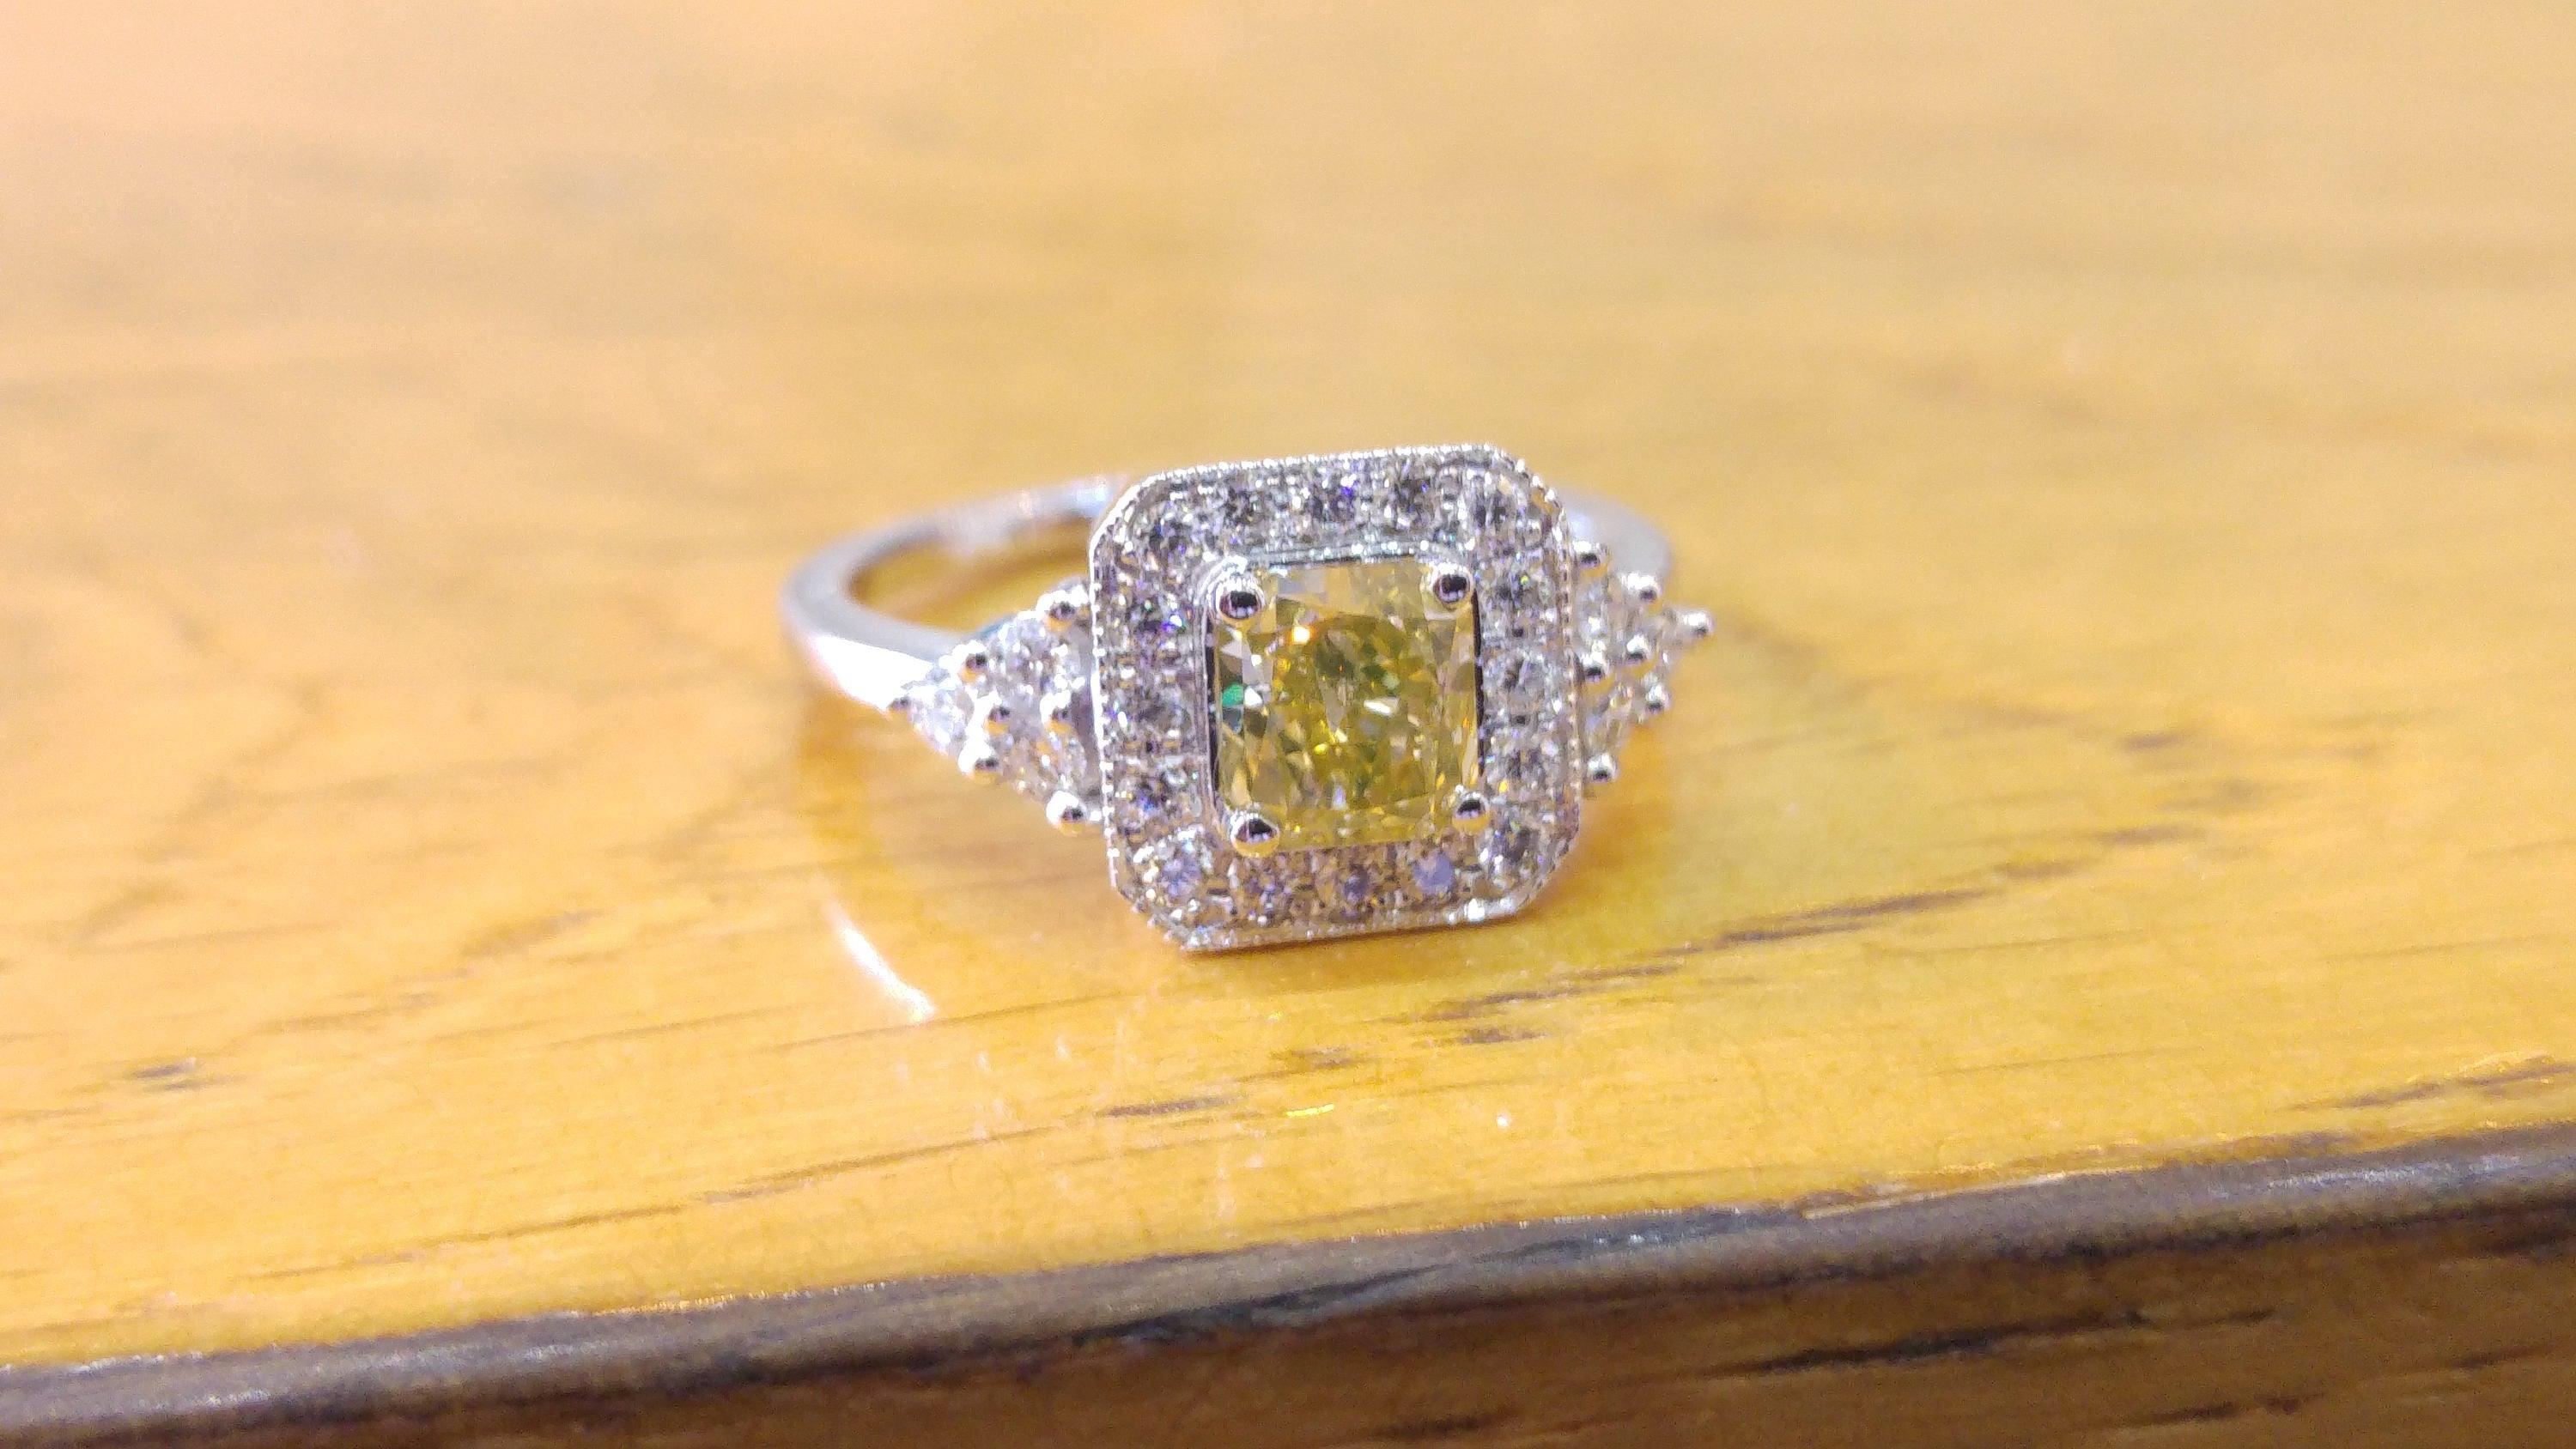 A beautiful square shaped diamond engagement ring made of 14K White Gold set with a fancy yellow diamond of 0.60ct (can be set with any stone size) accented by white round diamonds. The center diamond of this classic art deco halo ring is of